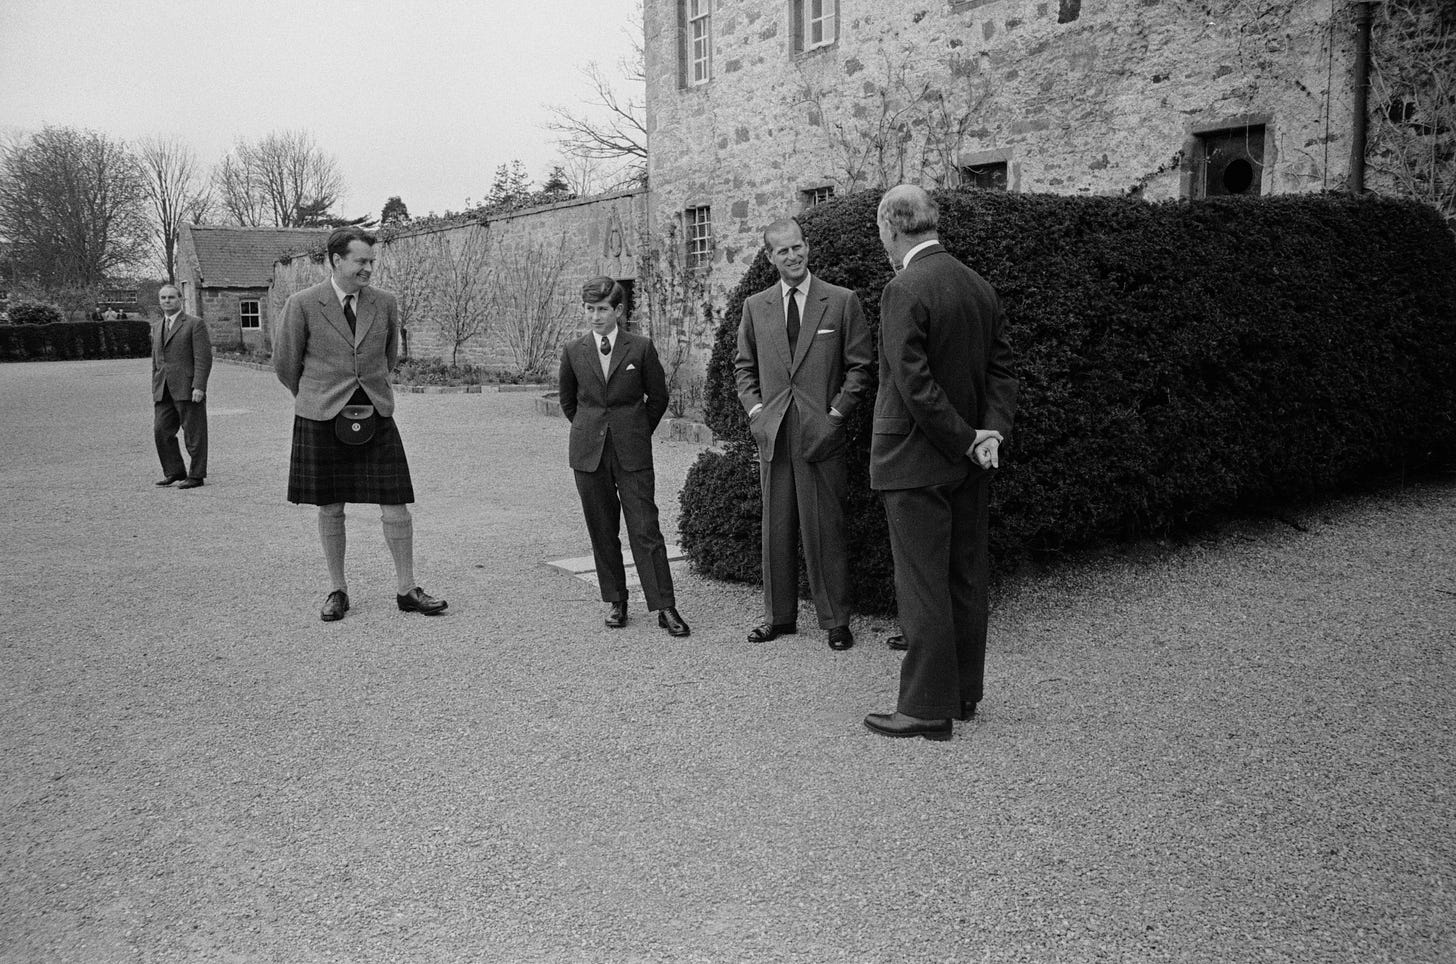 Prince Charles arriving at Gordonstoun in 1962 with Prince Philip